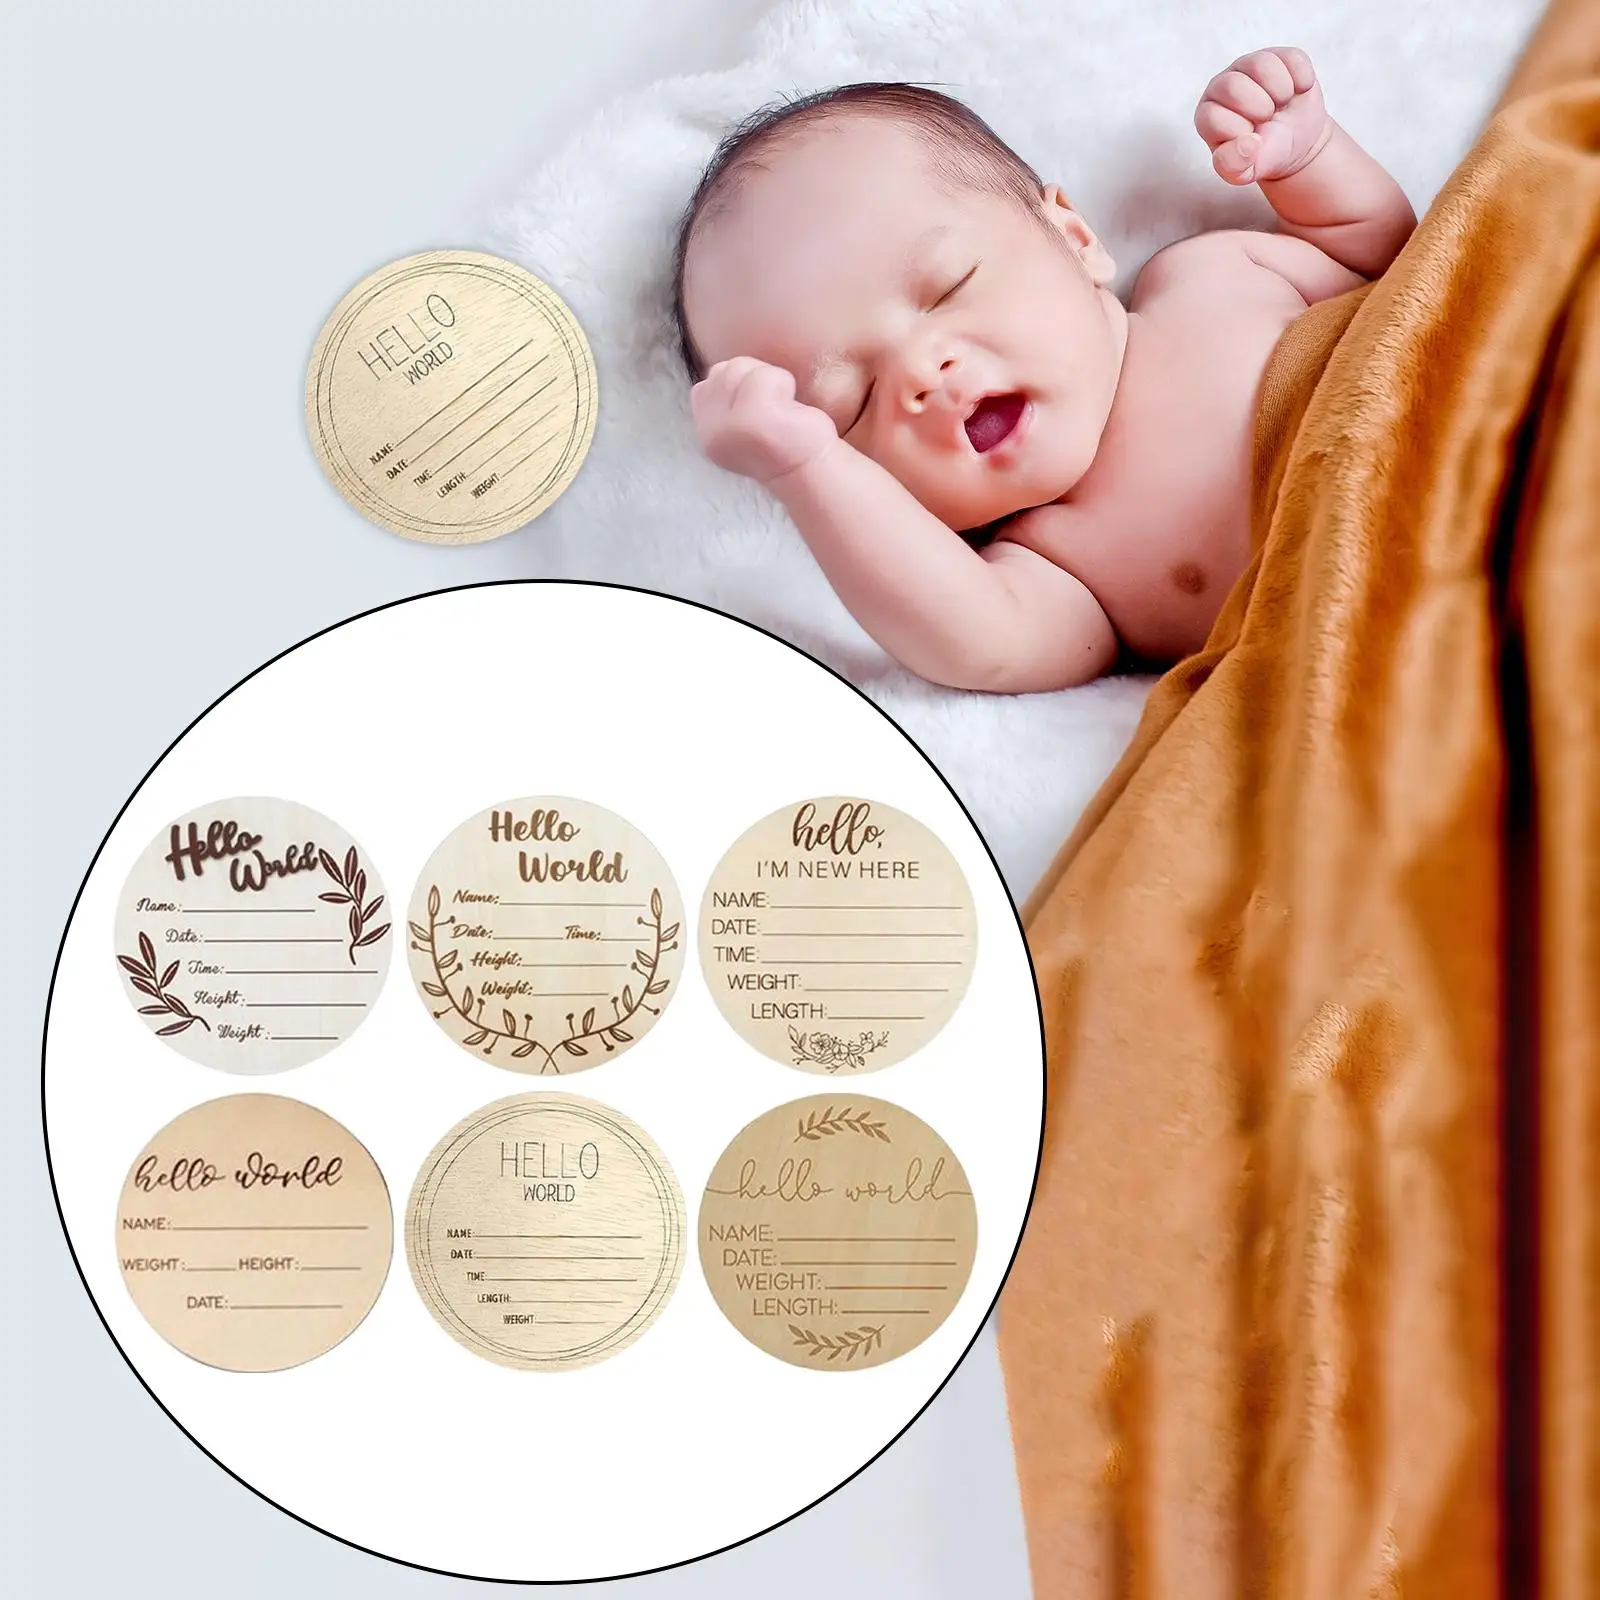 18 Pieces Baby Milestone Discs Double Sided for Baby Registry Shower Gifts